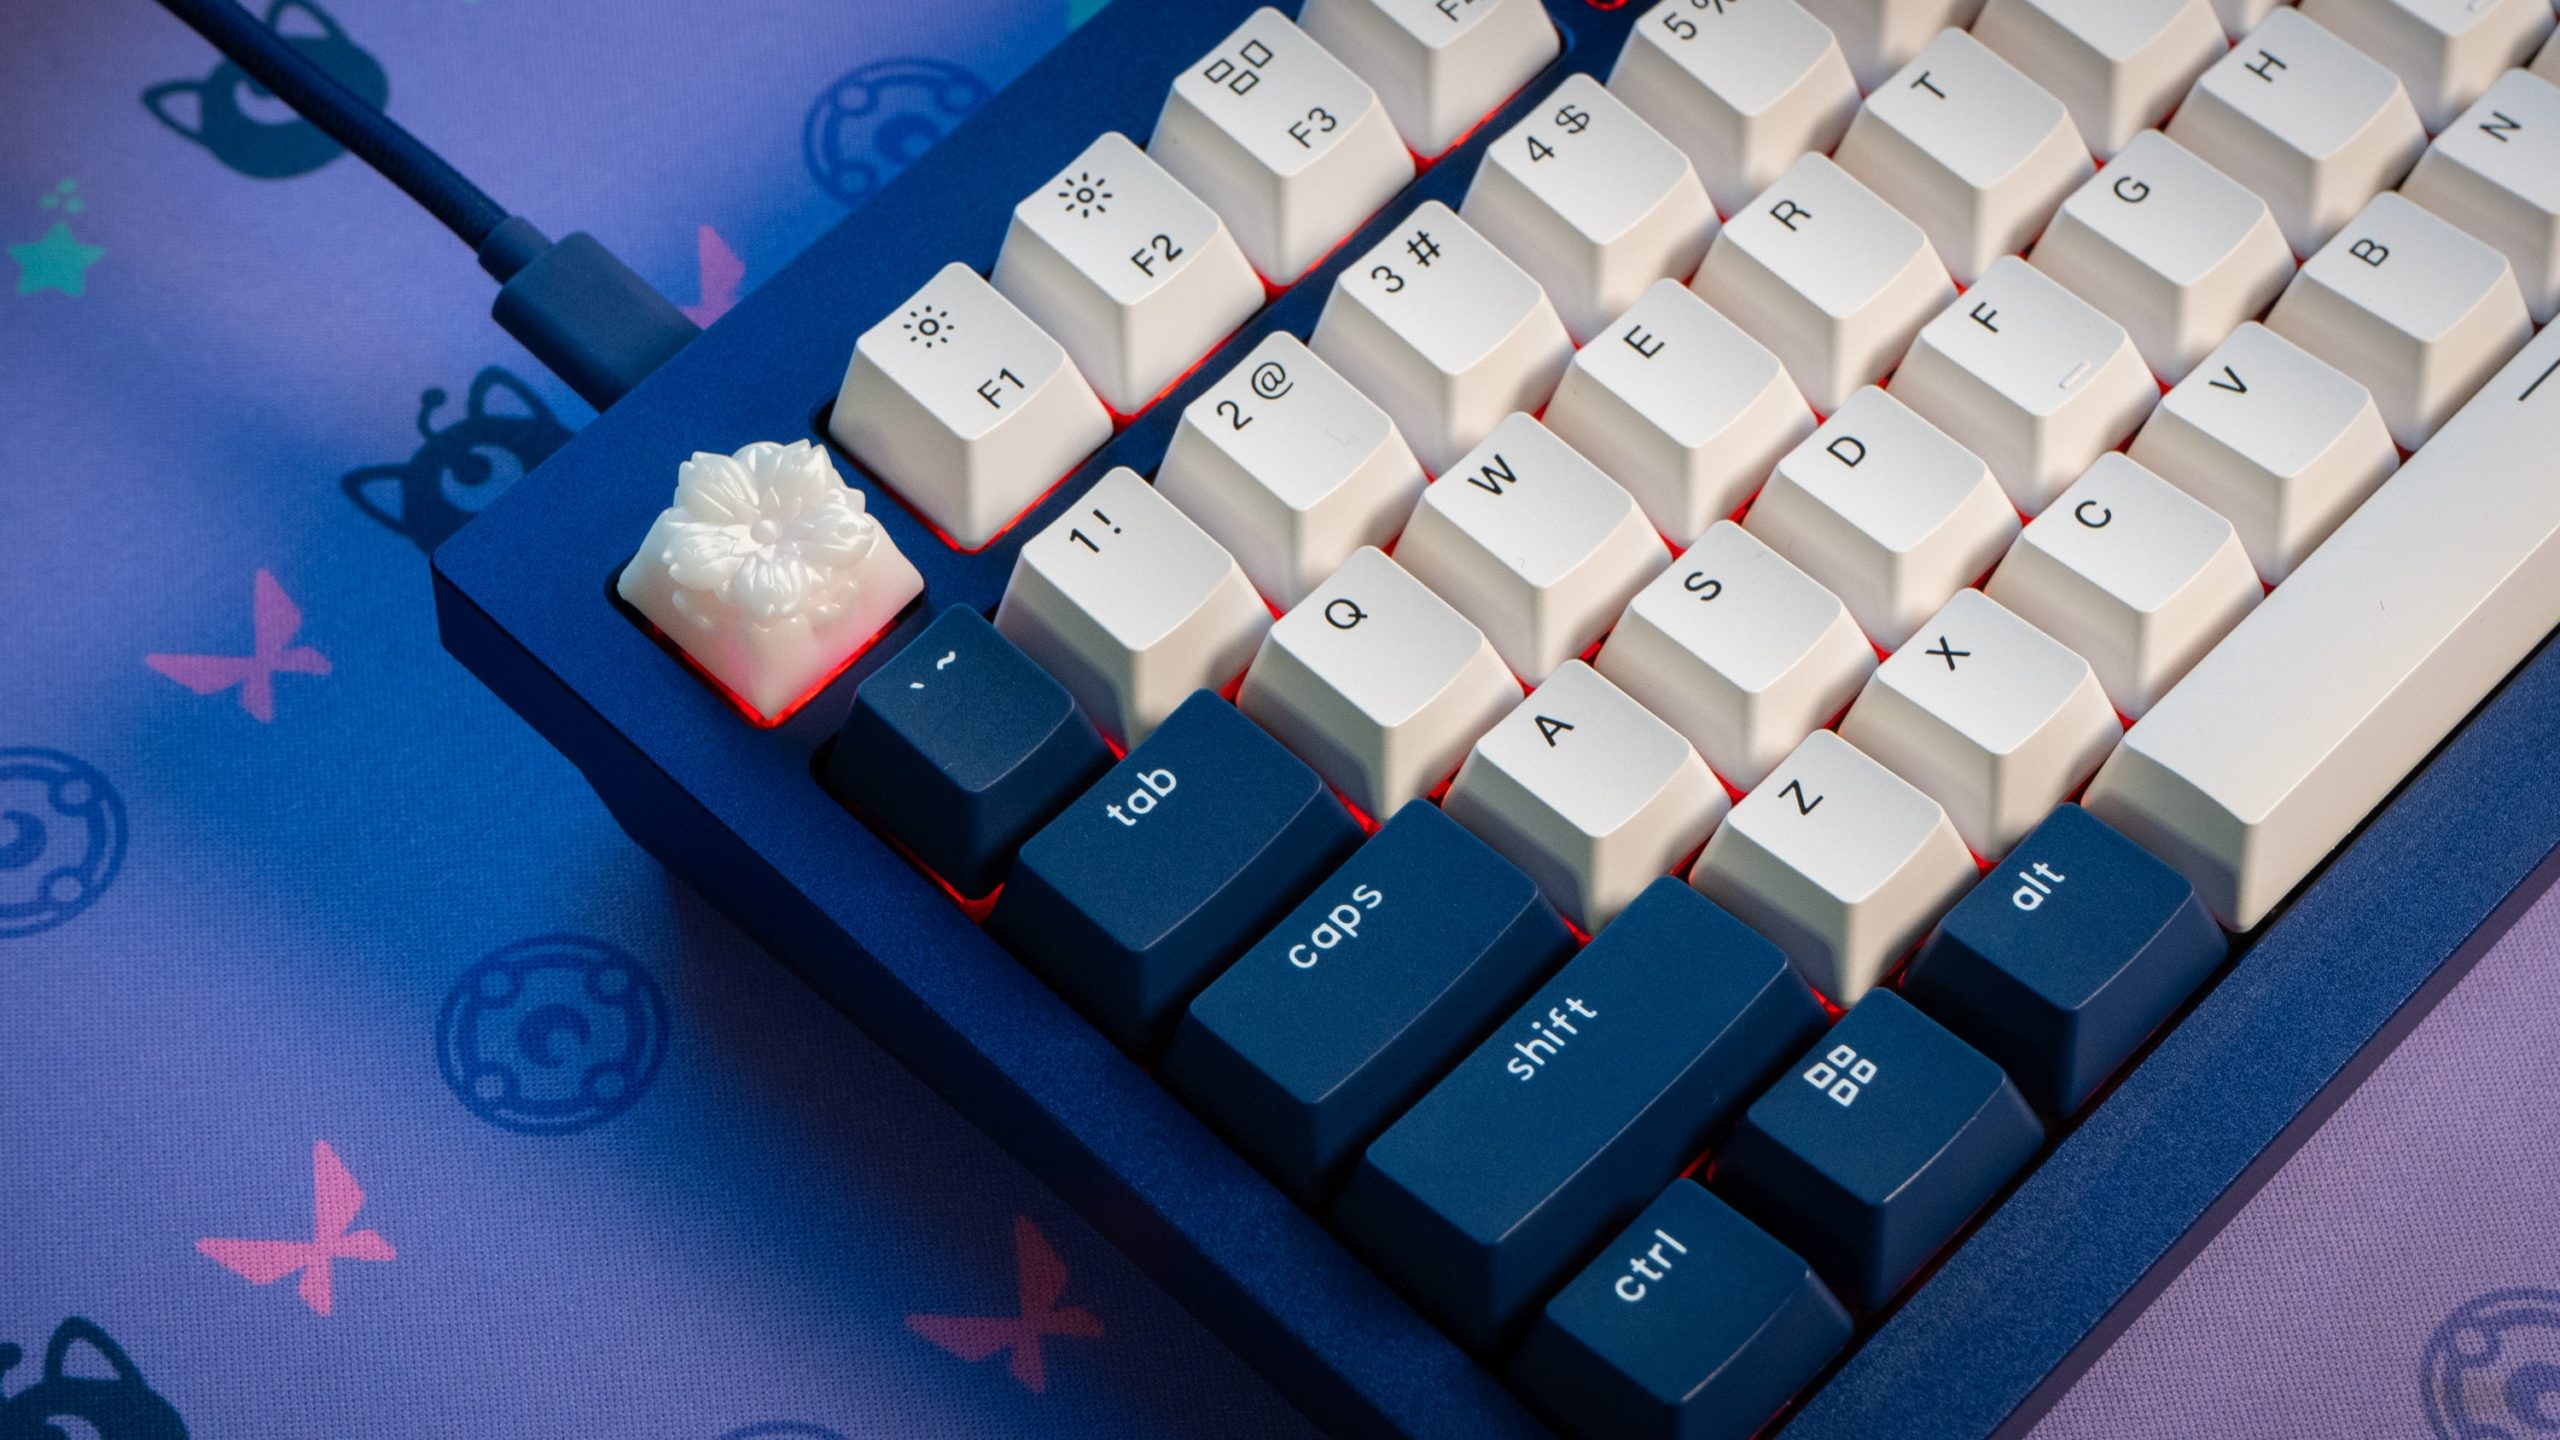 I swapped out the Escape key for a Capsmiths artisan keycap.  (Photo: Florence Ion / Gizmodo)